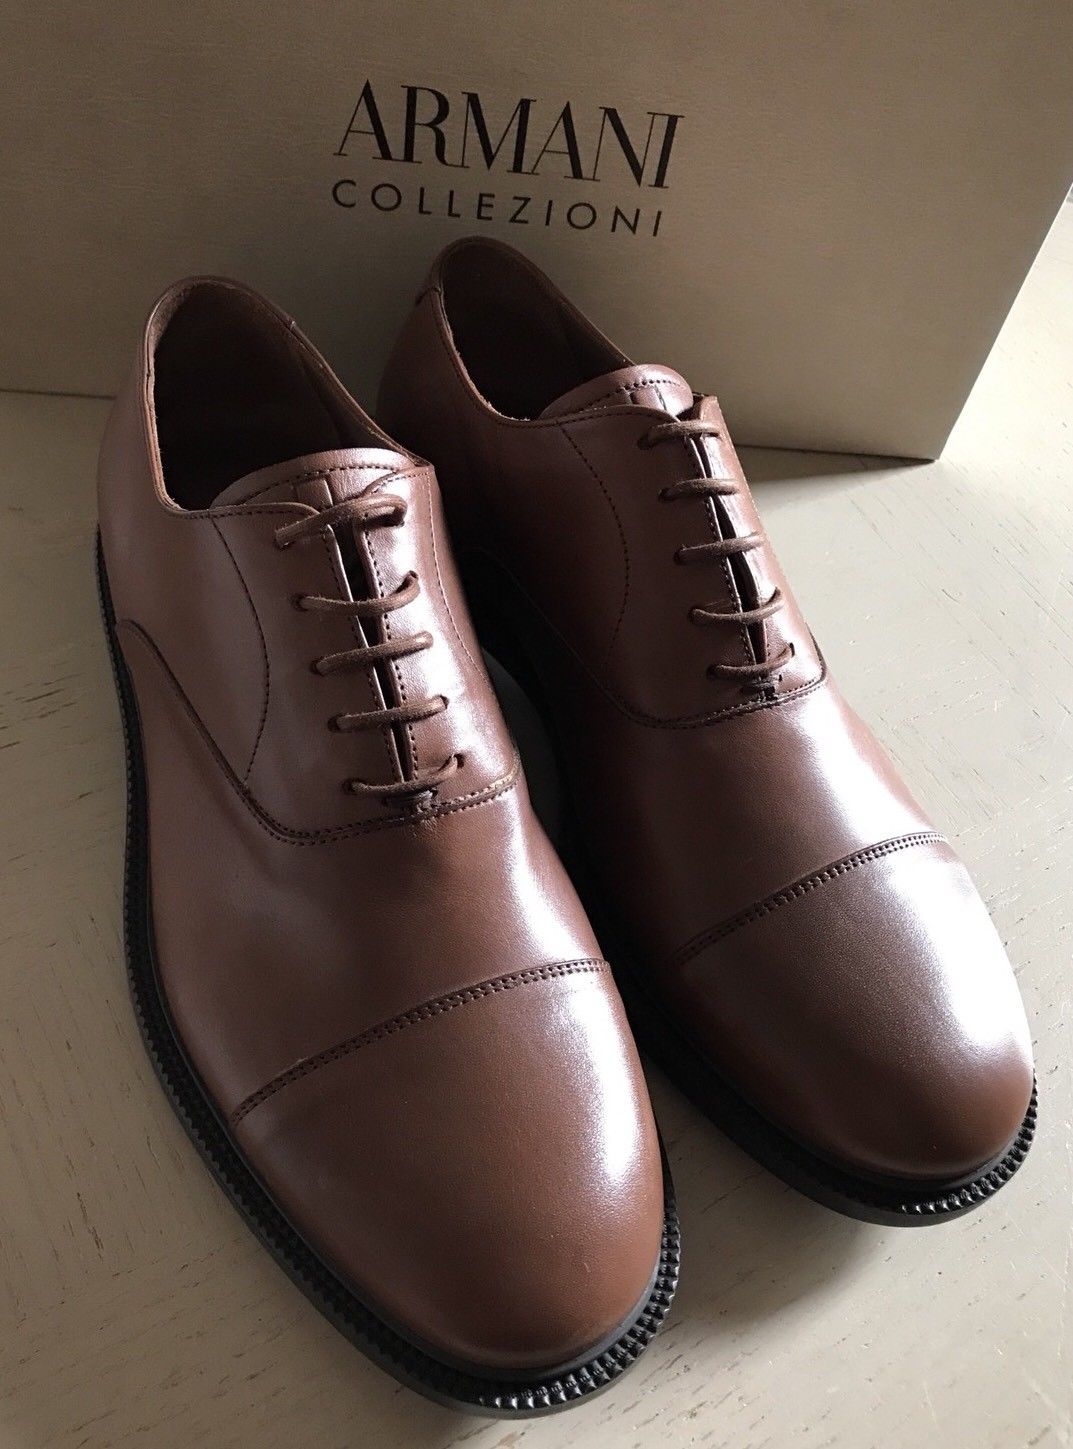 New $675 Armani Collezioni Mens Leather Oxford Shoes Brown 8.5 US X6C050 Italy - BAYSUPERSTORE